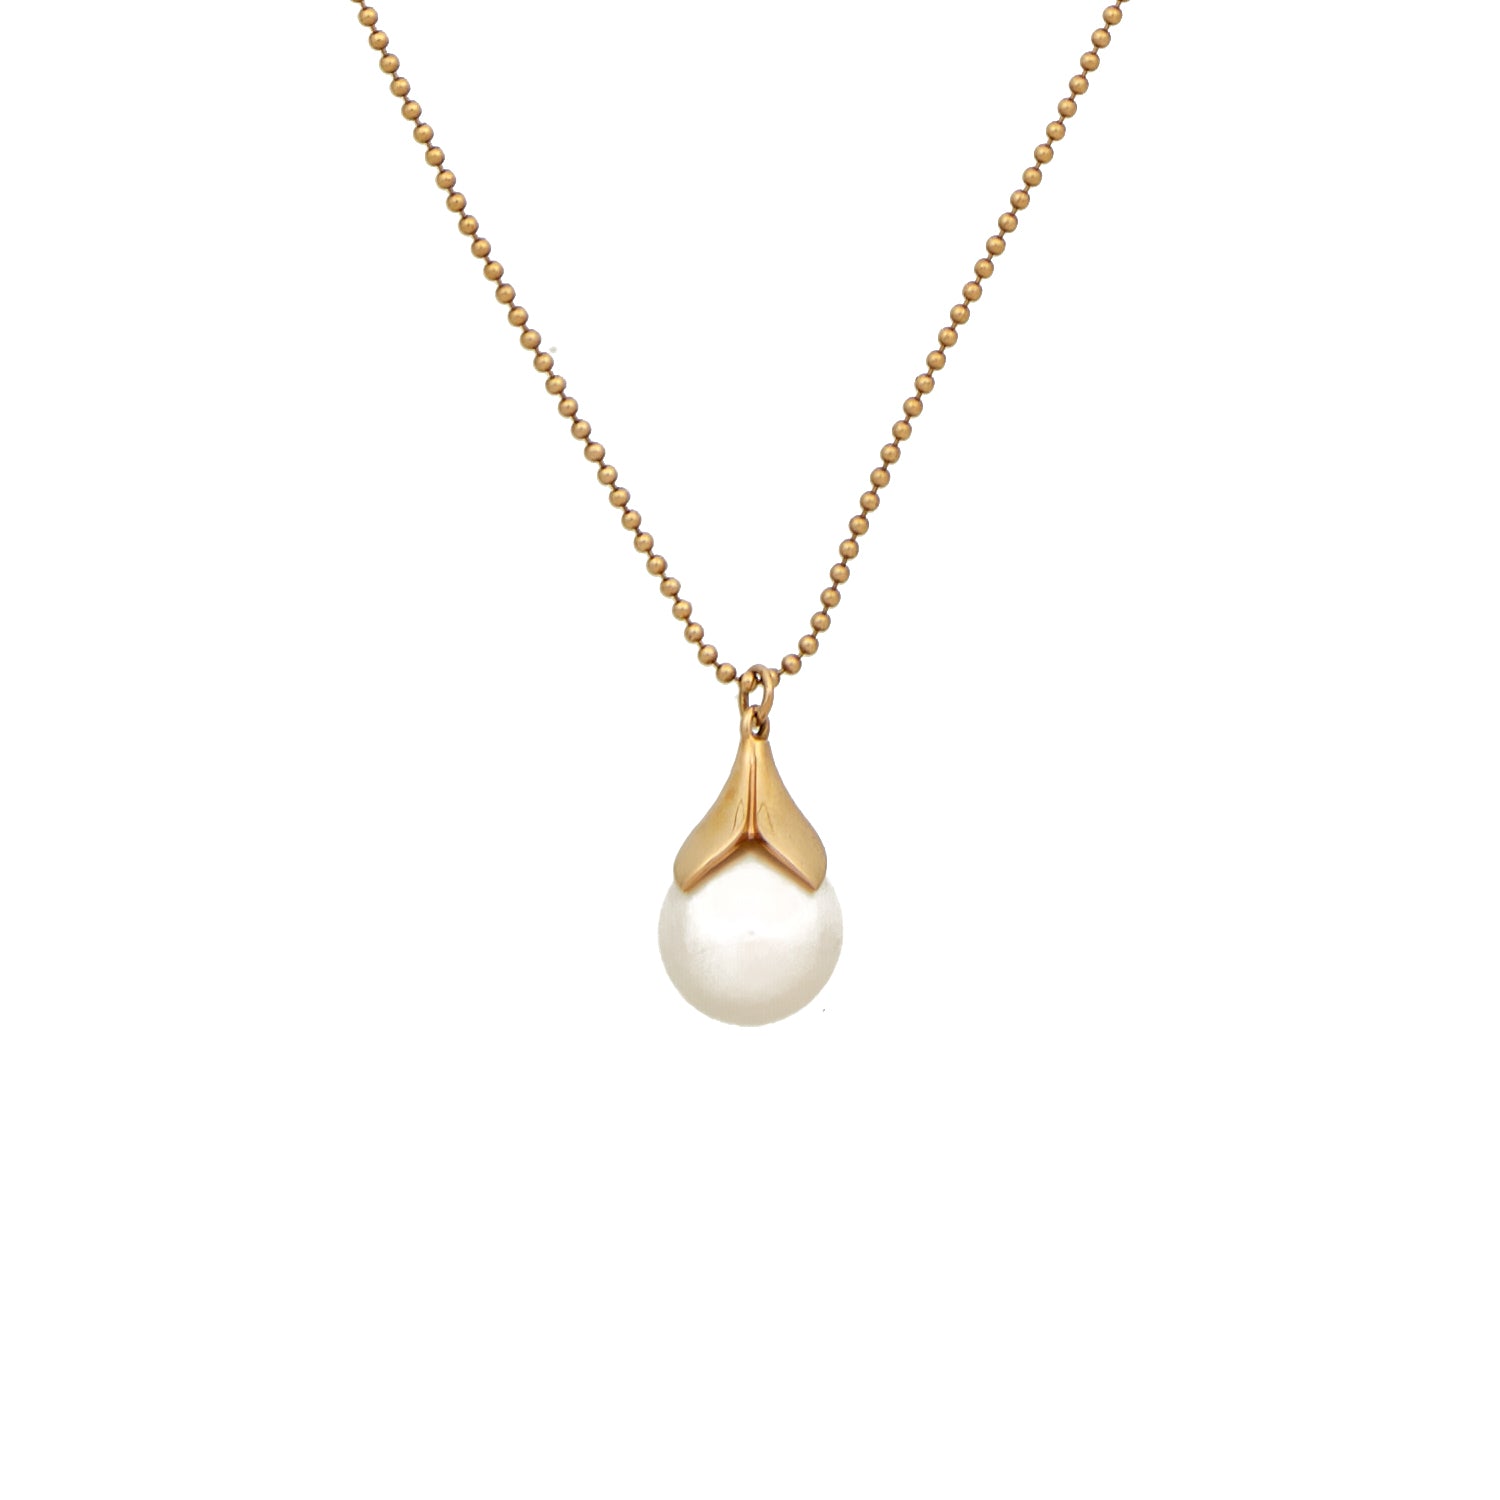 ROSE GOLD NECKLACE WITH PEARL